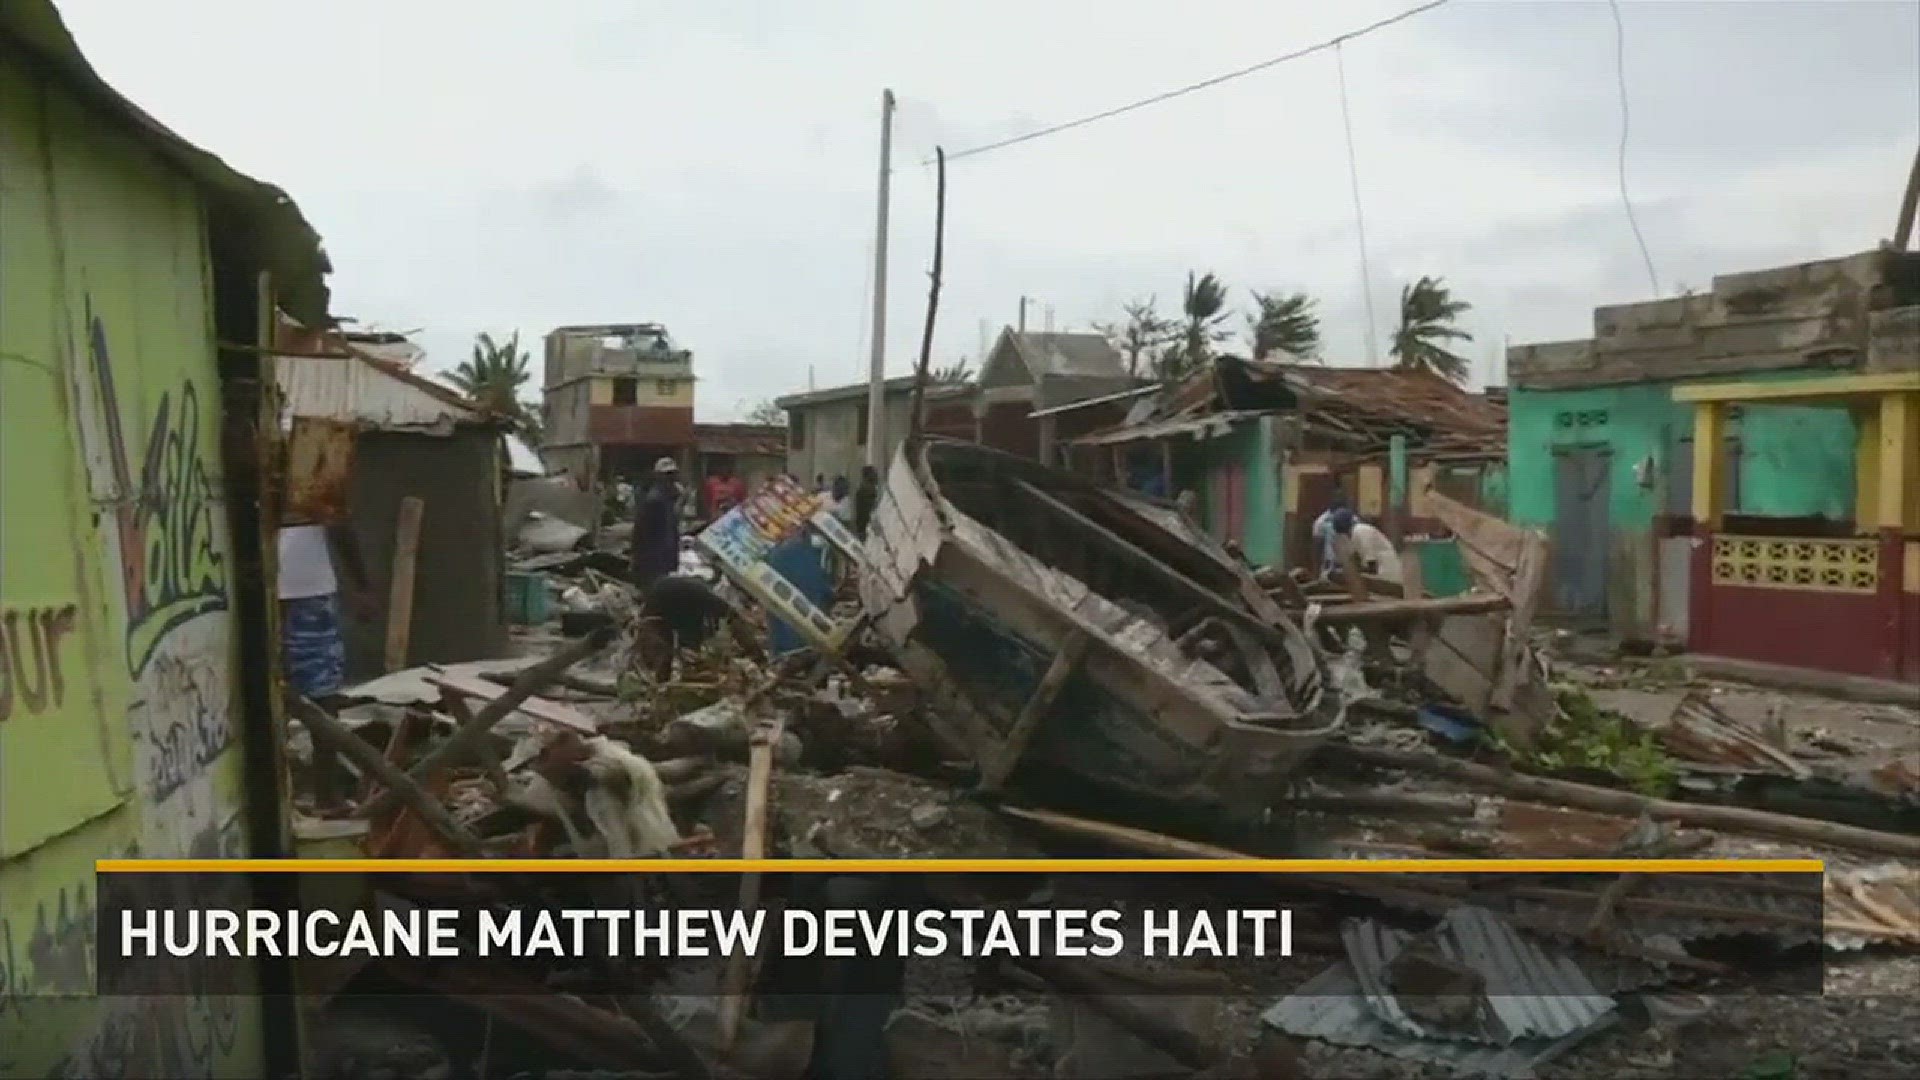 Hurricane Matthew is the greatest natural disaster to hit Haiti since the earthquake of 2010.